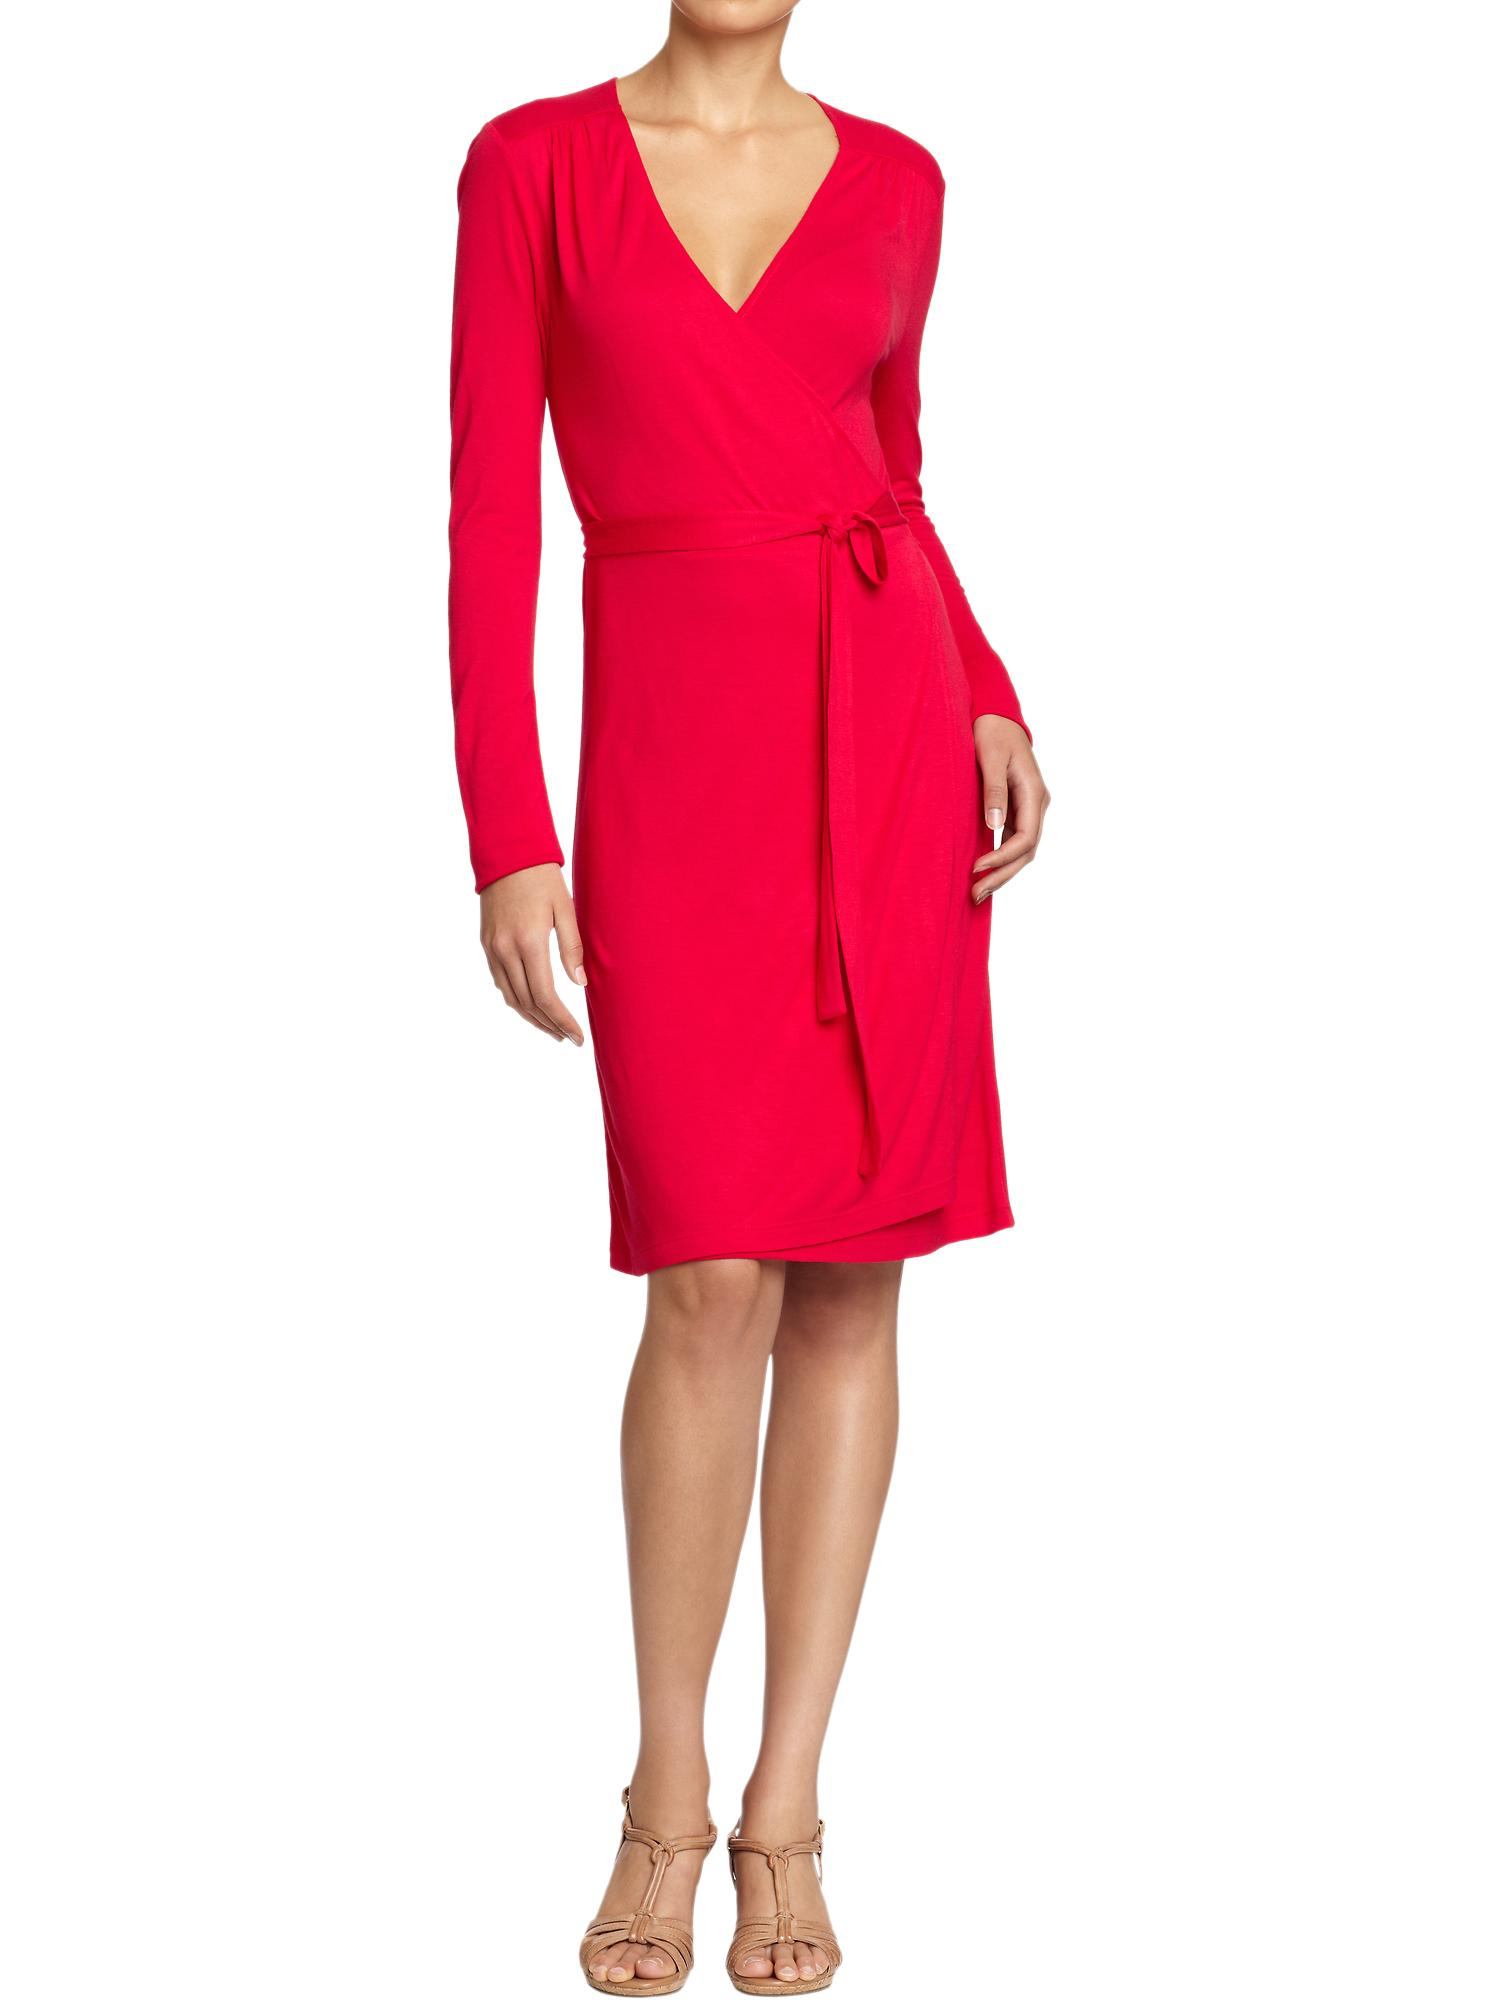 Old Navy Wrap Dress in Red (amaryllis red)